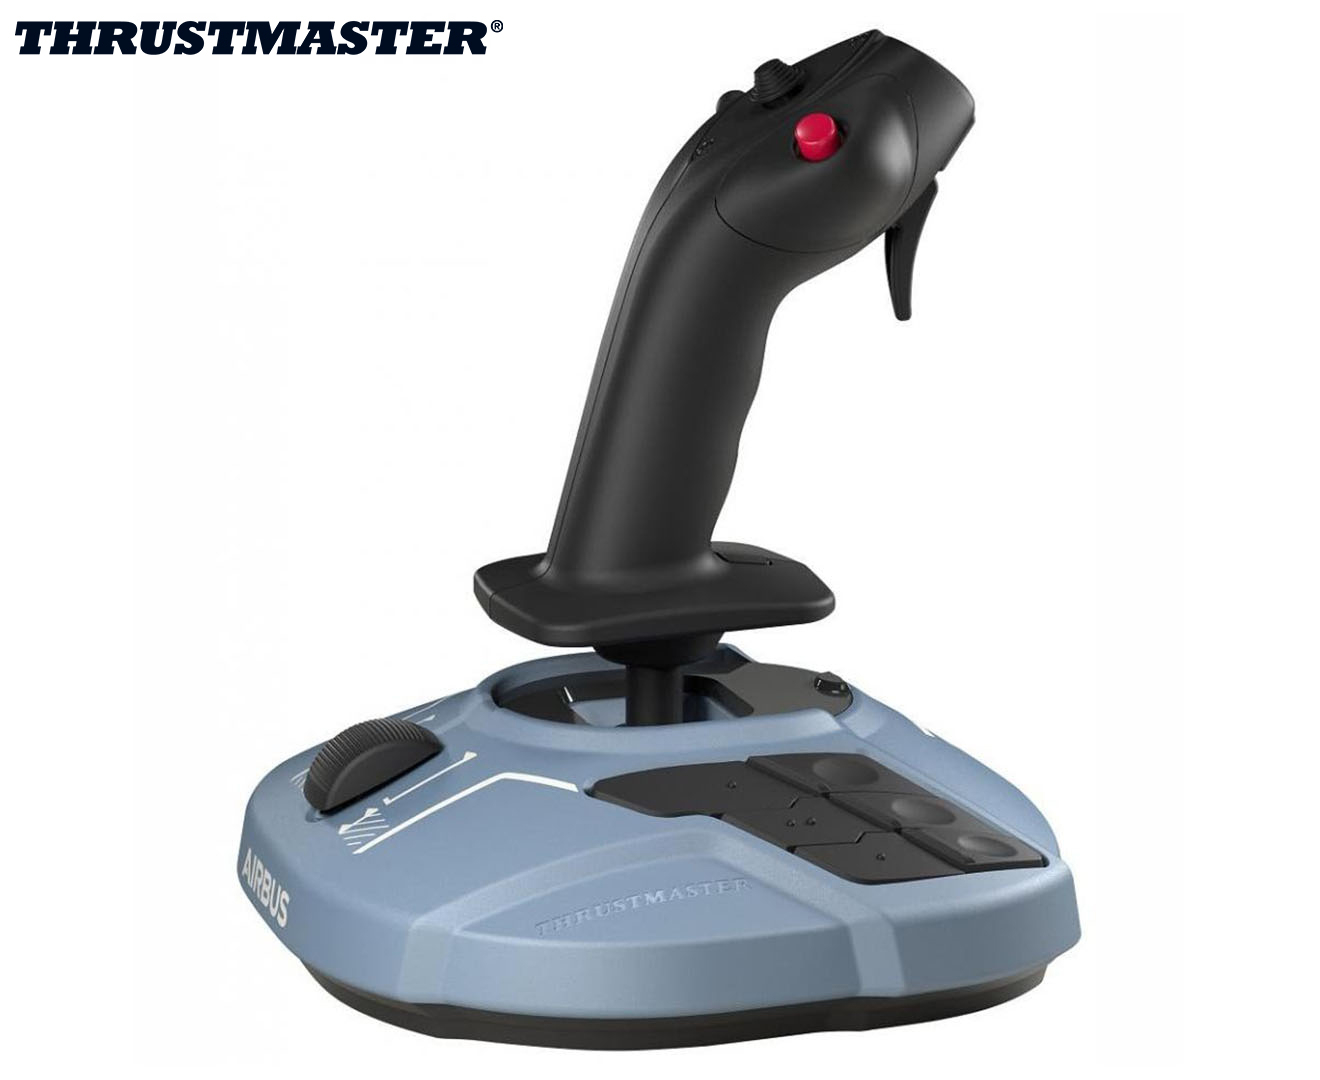 How to Use the Thrustmaster TCA Sidestick & Quadrant with Middle